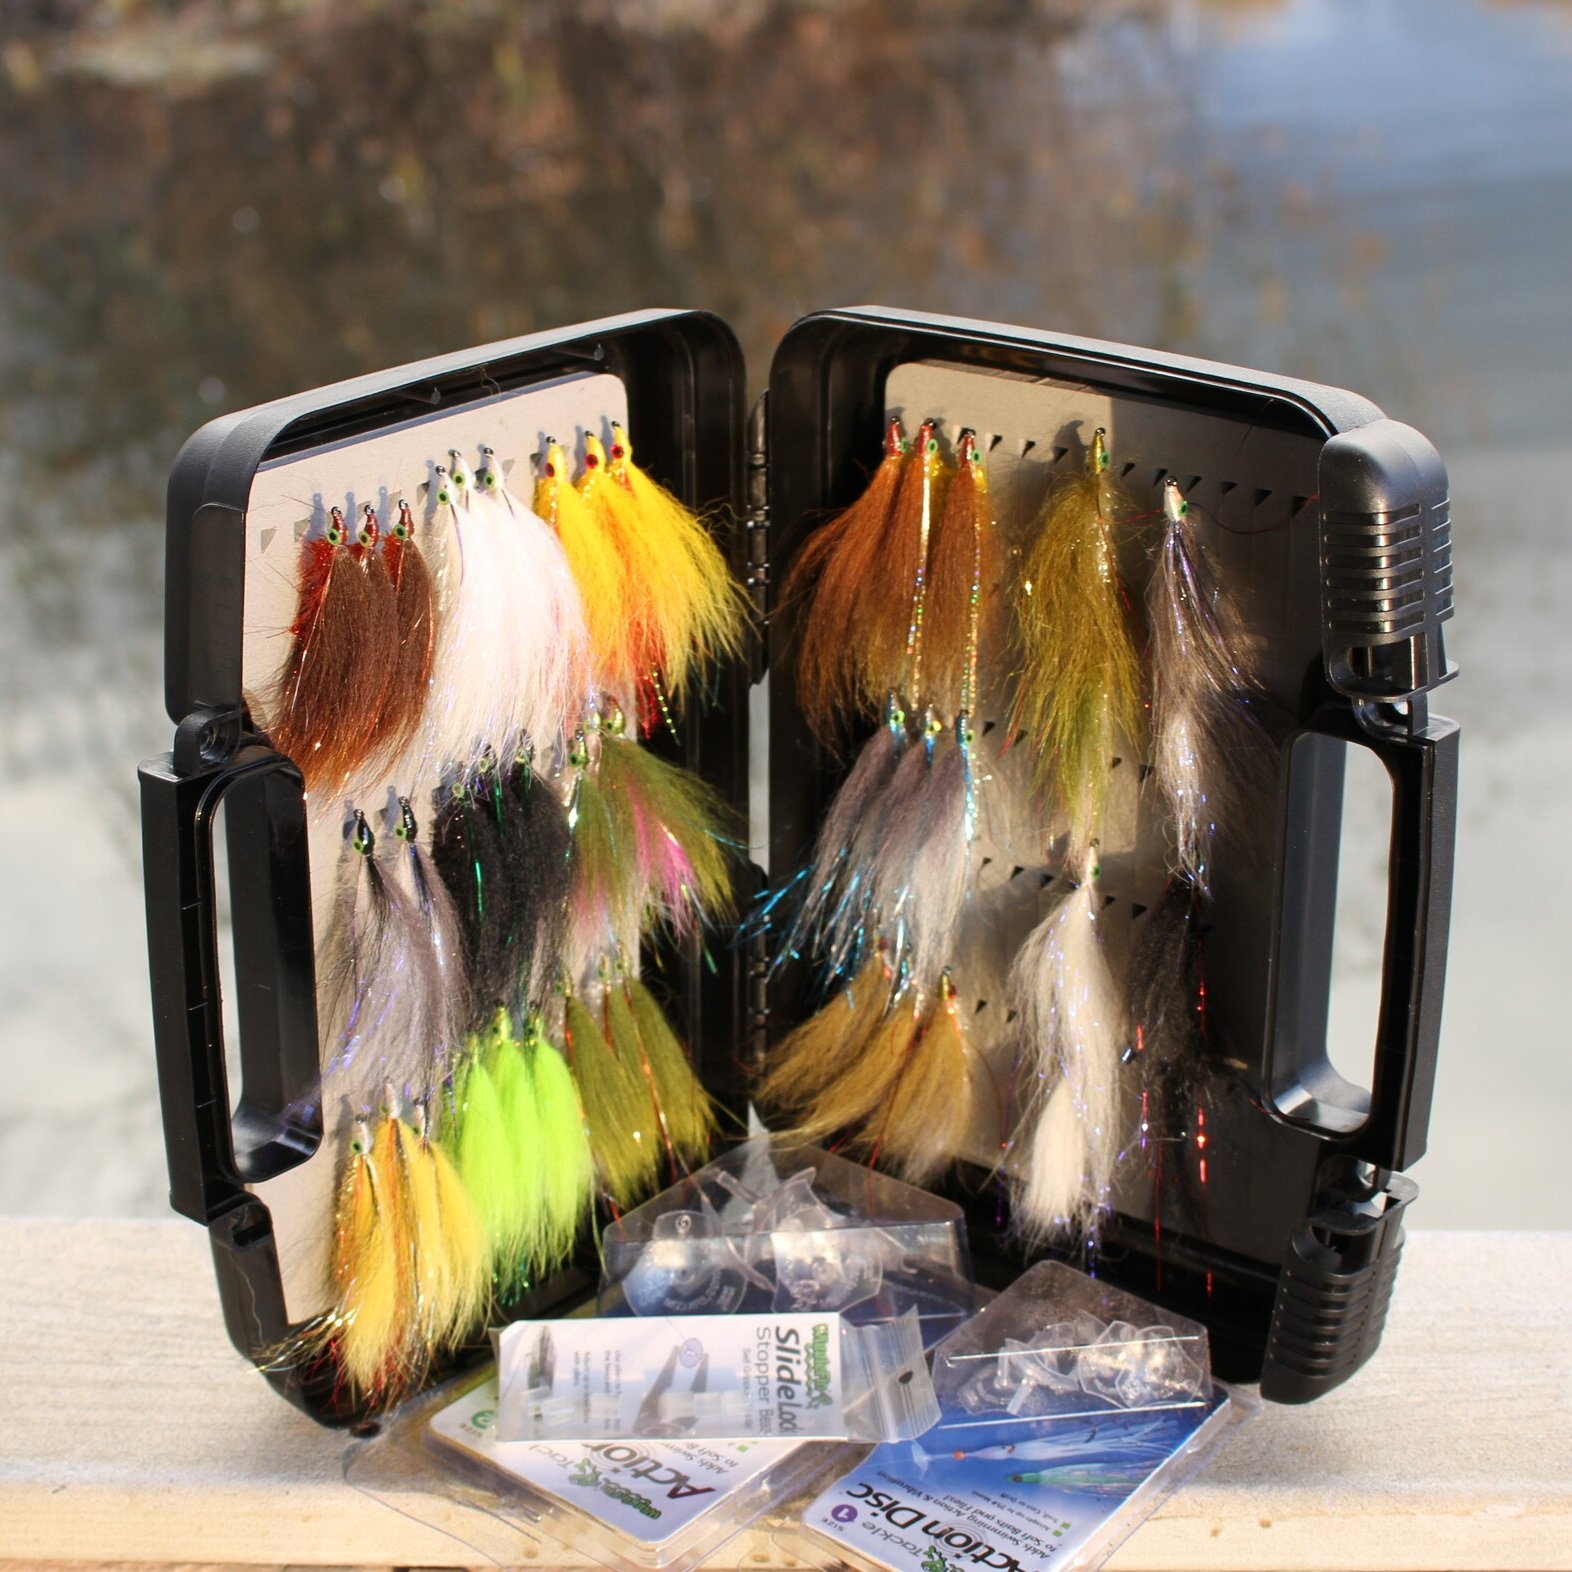 Boat Streamer Fly Box, 40 Trolling Flies, Action Discs, Slide Lock Beads,  and Fas Snaps. —